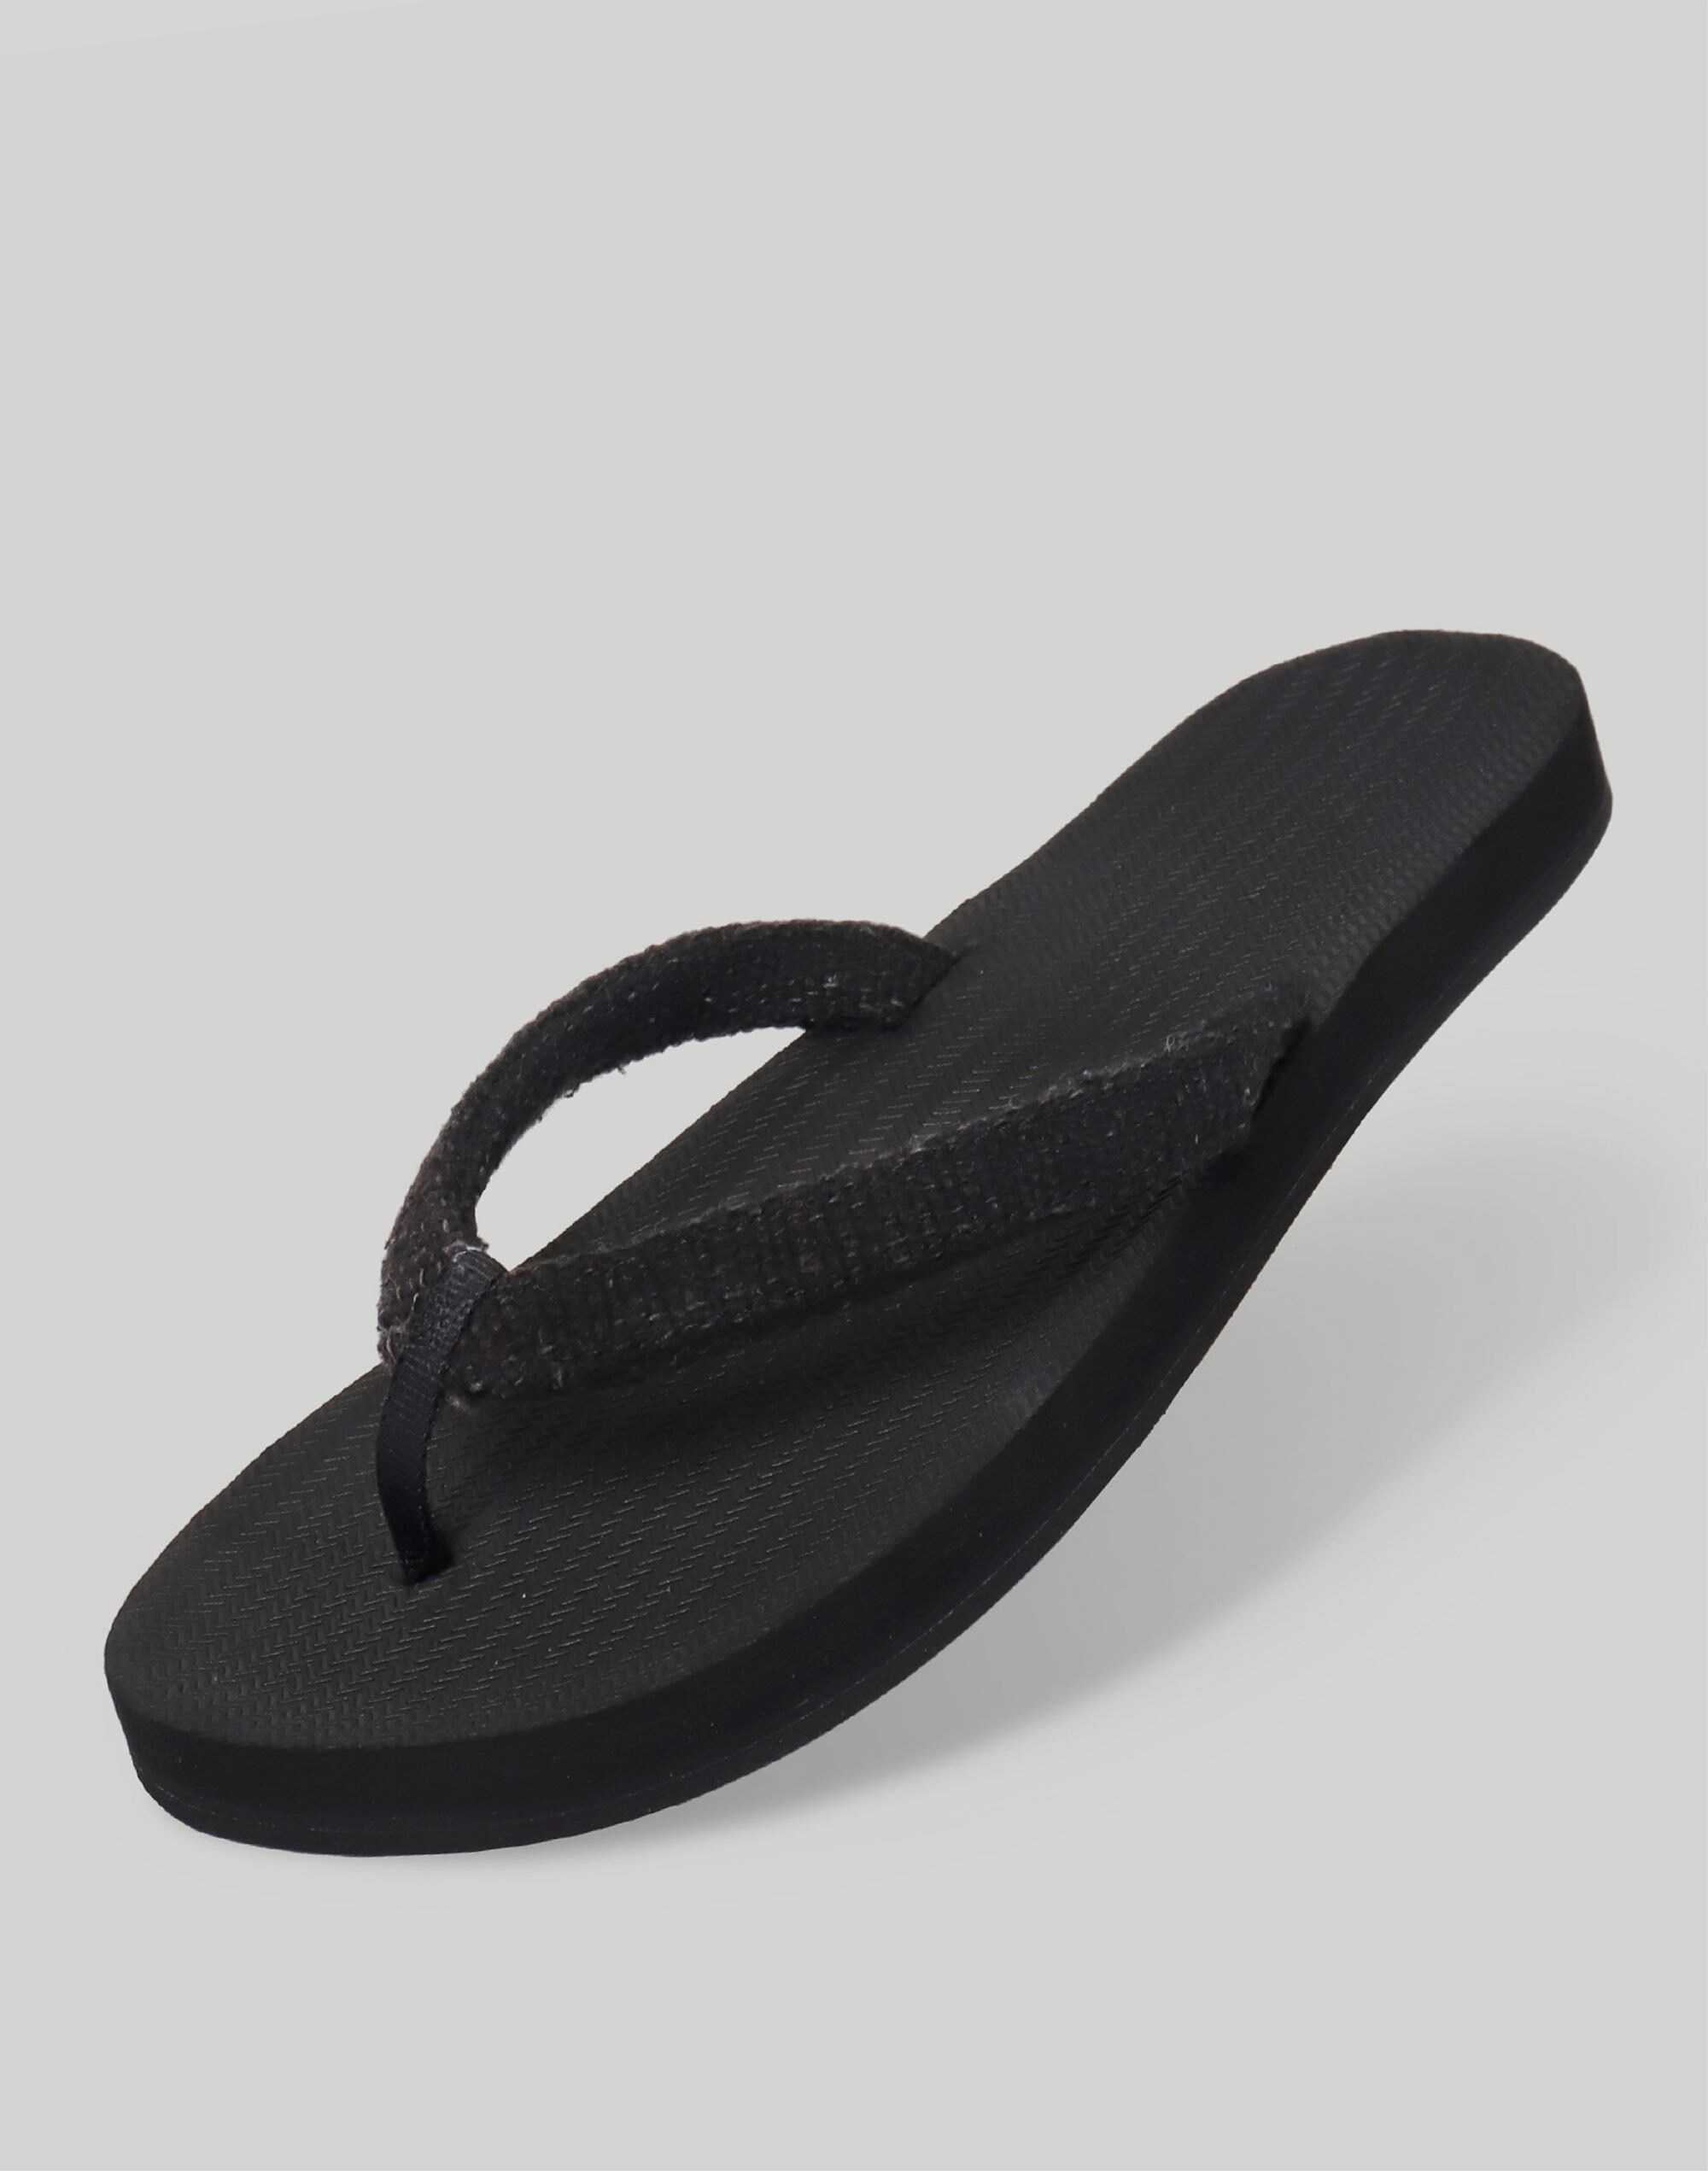 Indosole Women's Recycled Textile Flip Flops